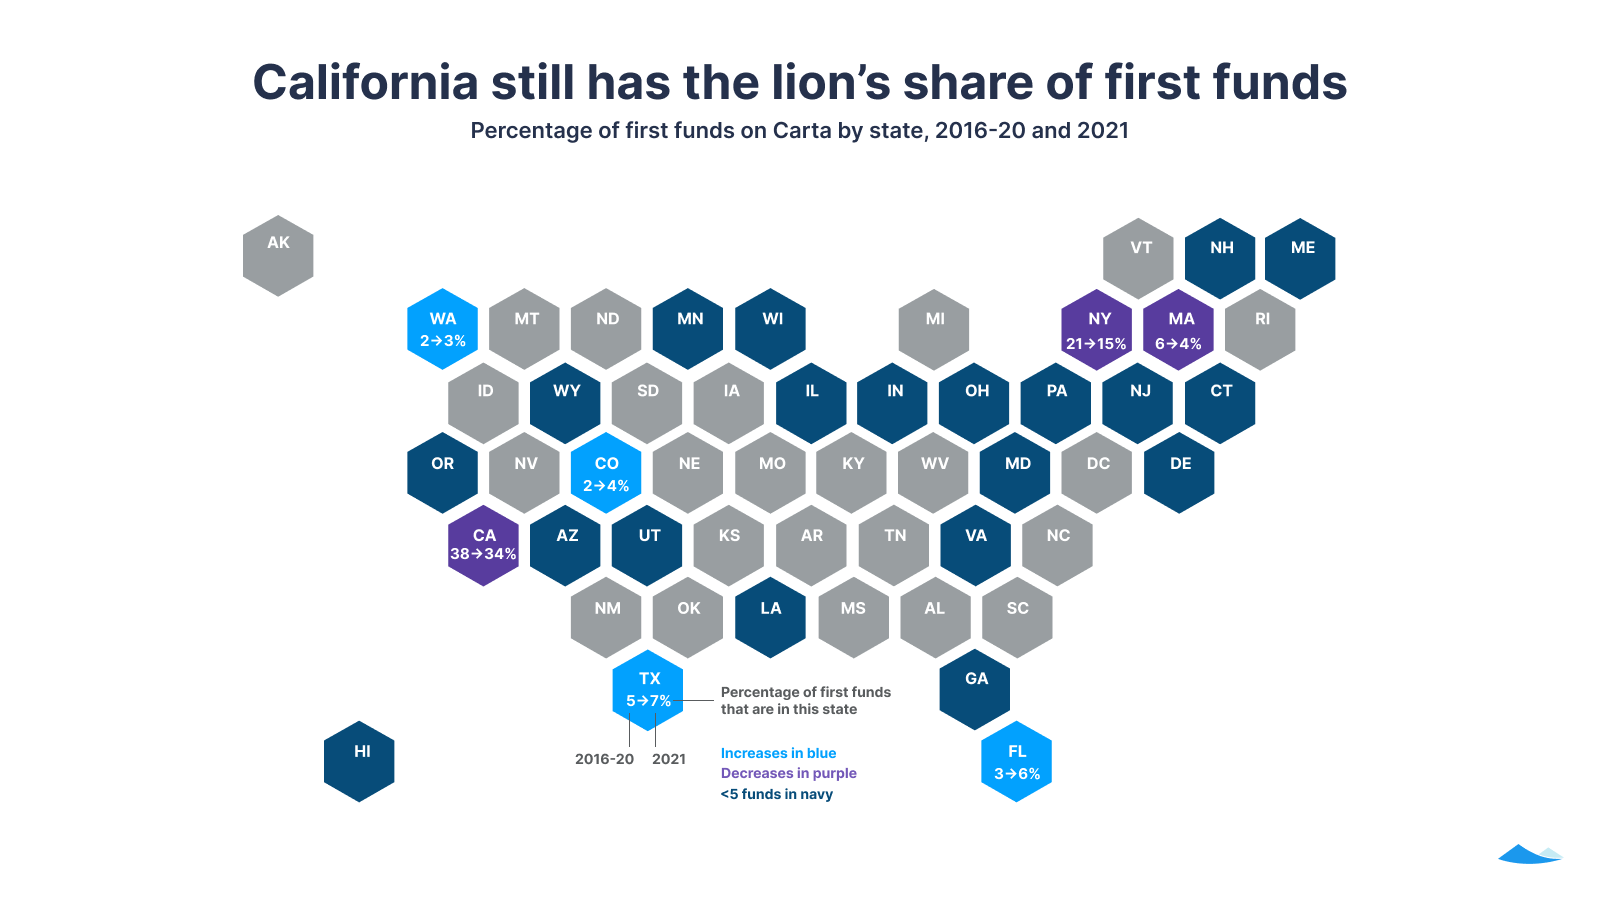 California still has the lion’s share of first funds: Percentage of first funds on Carta by state, 2016-20 and 2021